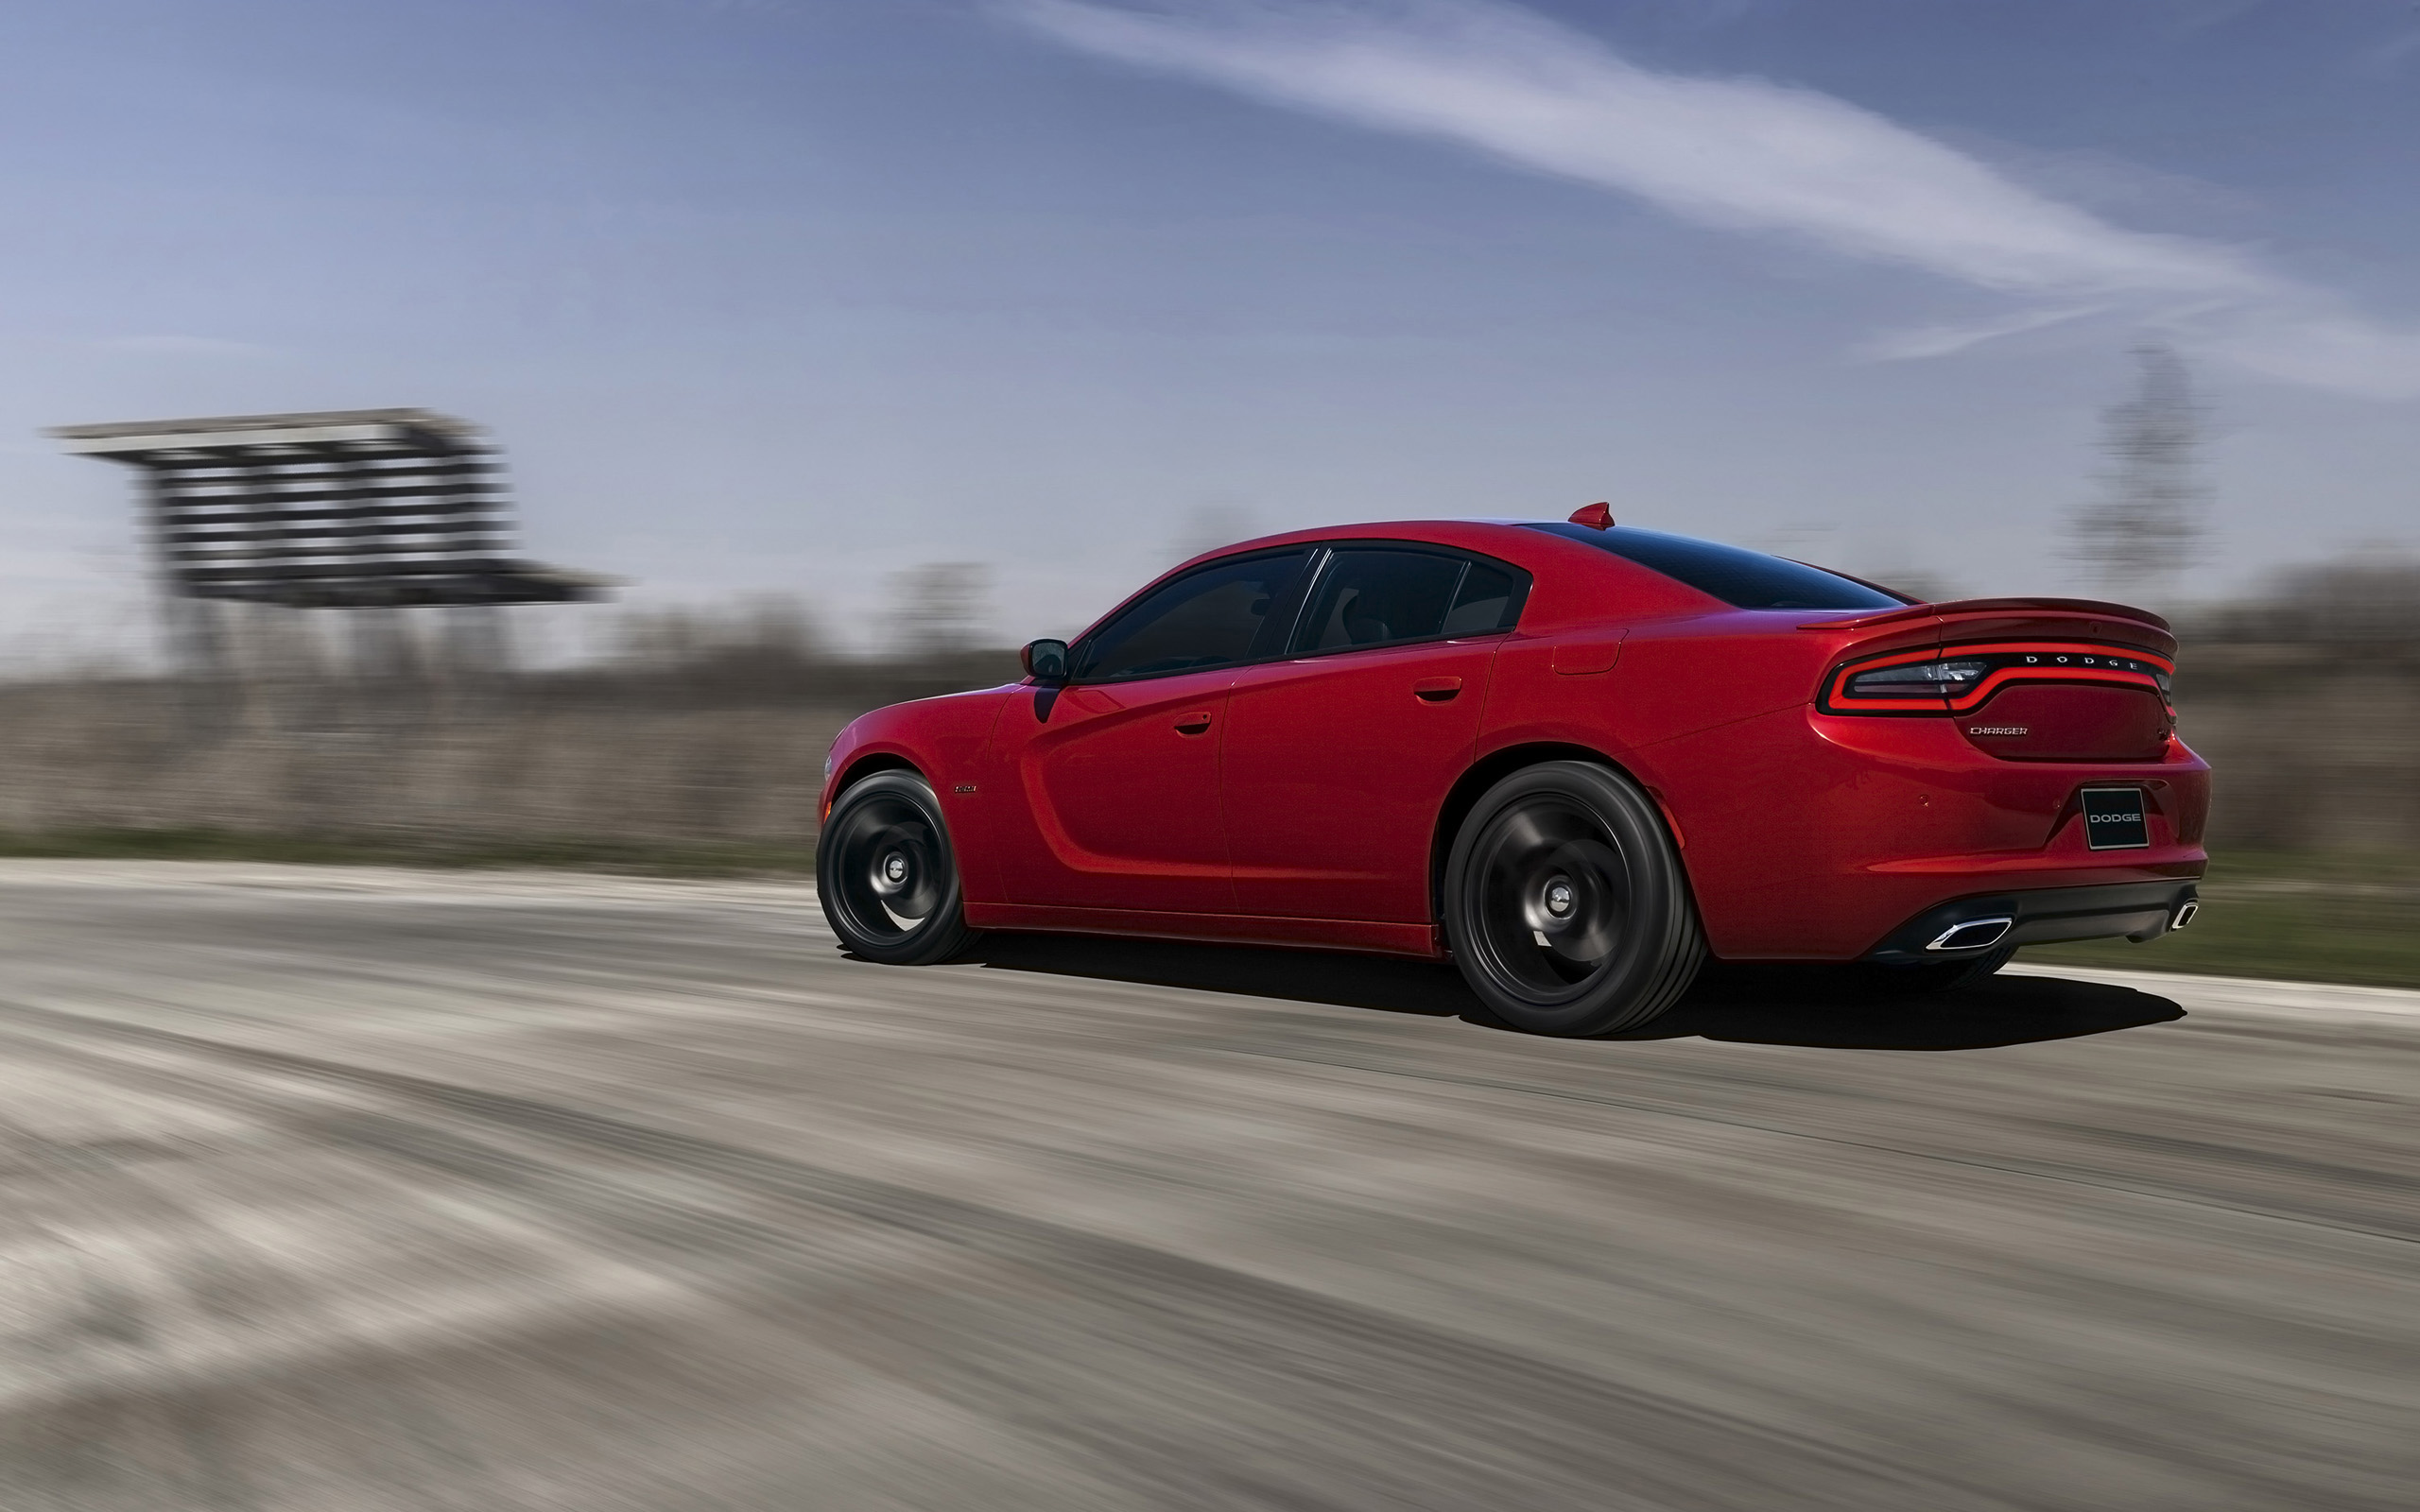 Dodge Charger HD Wallpaper | Background Image | 2560x1600 | ID:514649